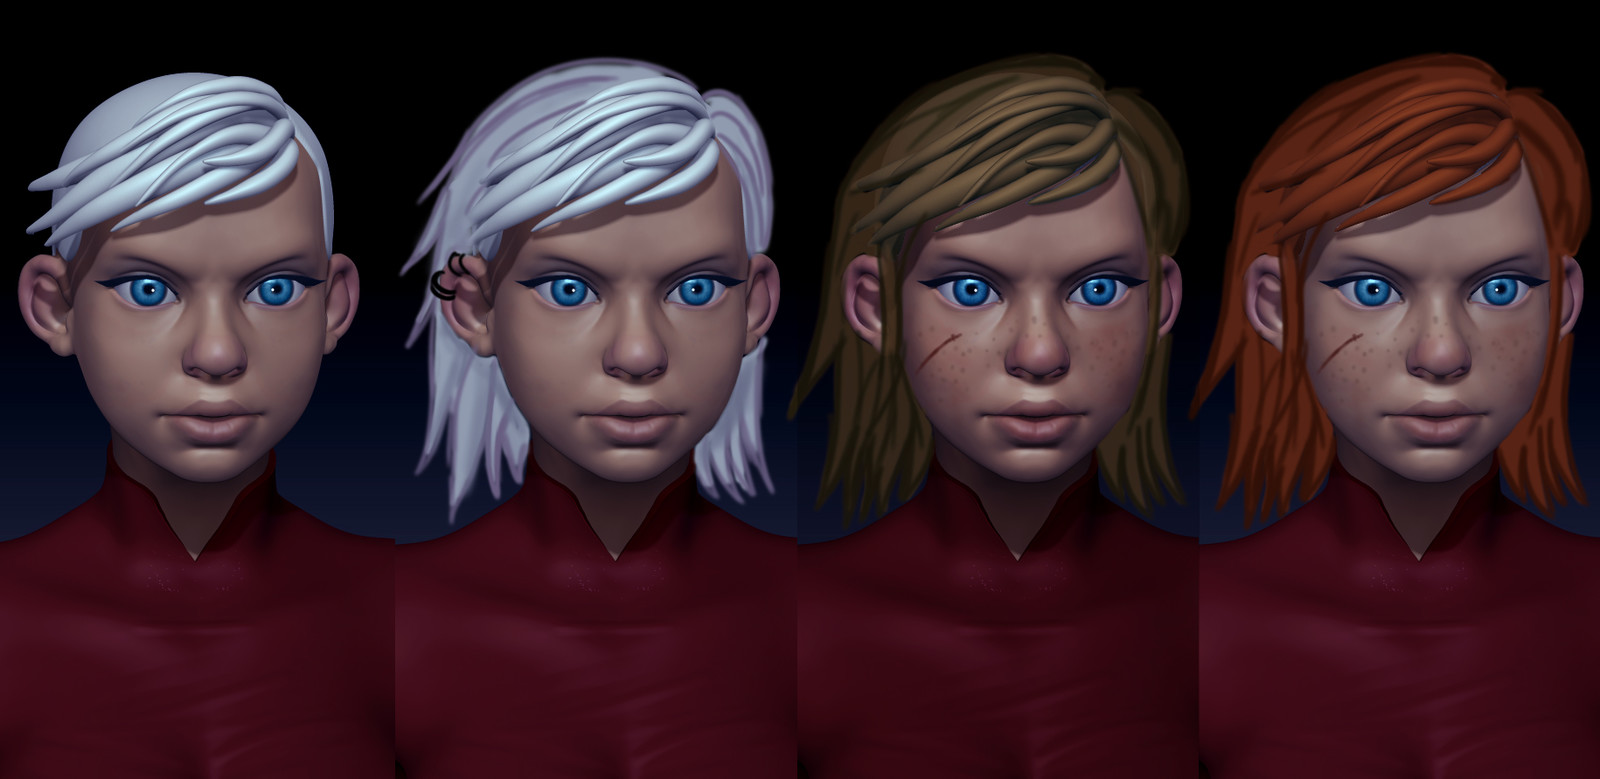 Recreating the face to have more character